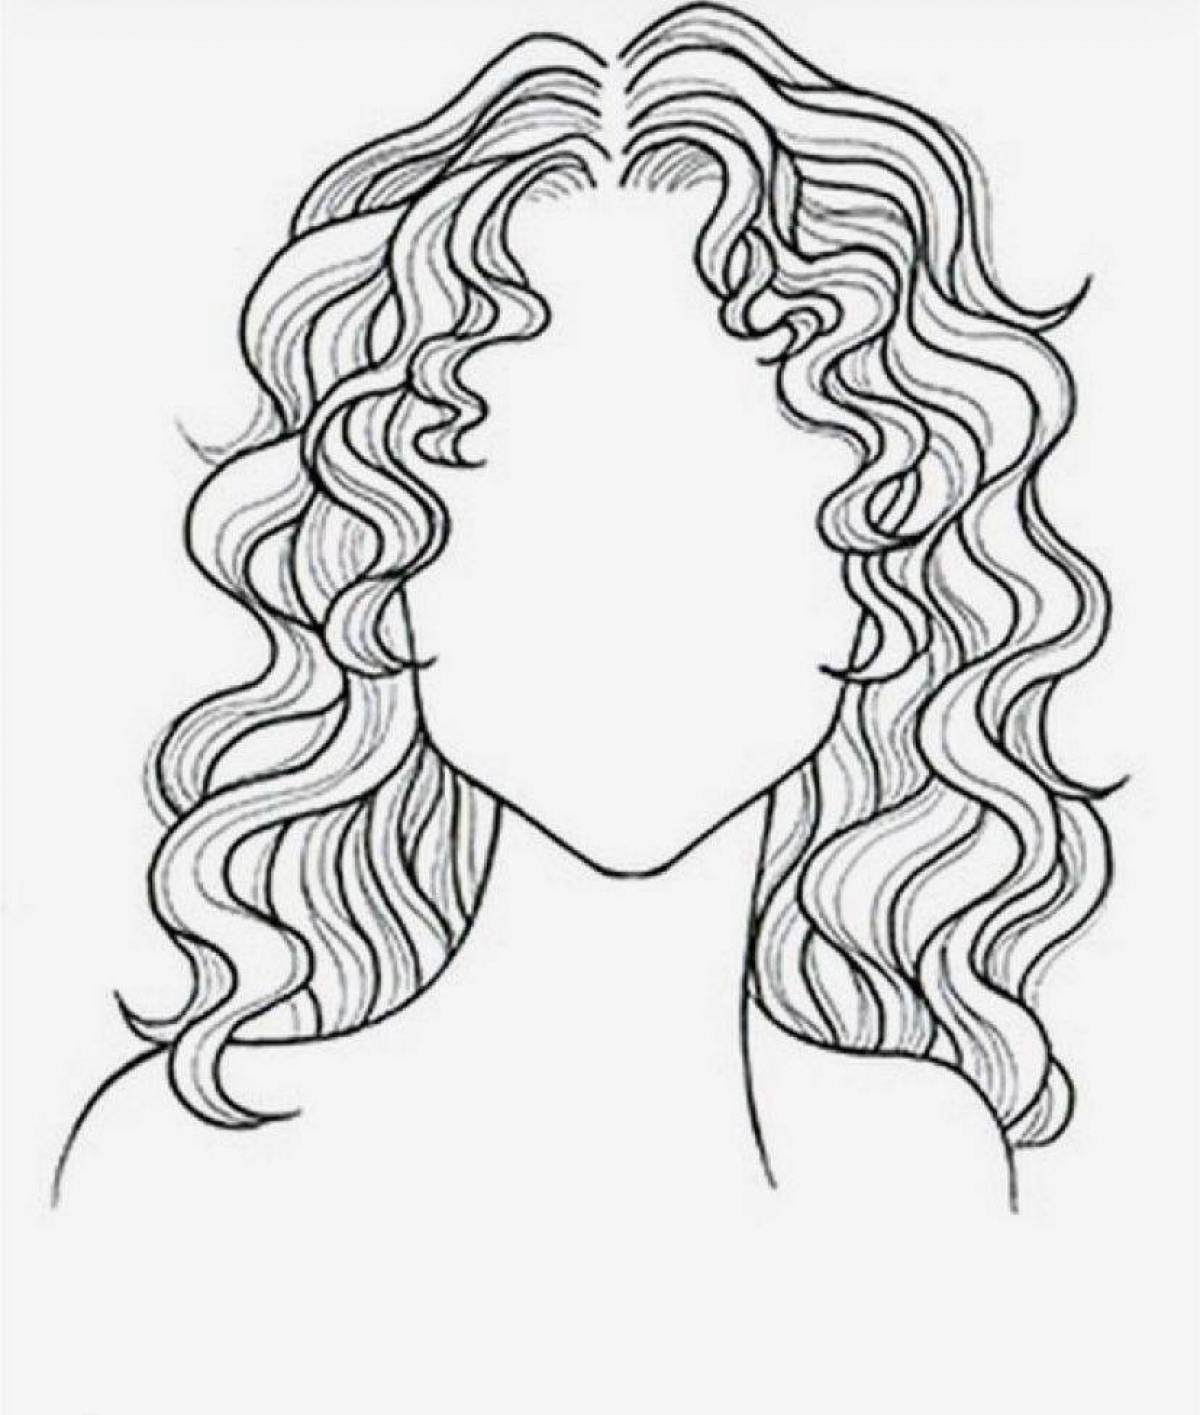 Tousled hair coloring page